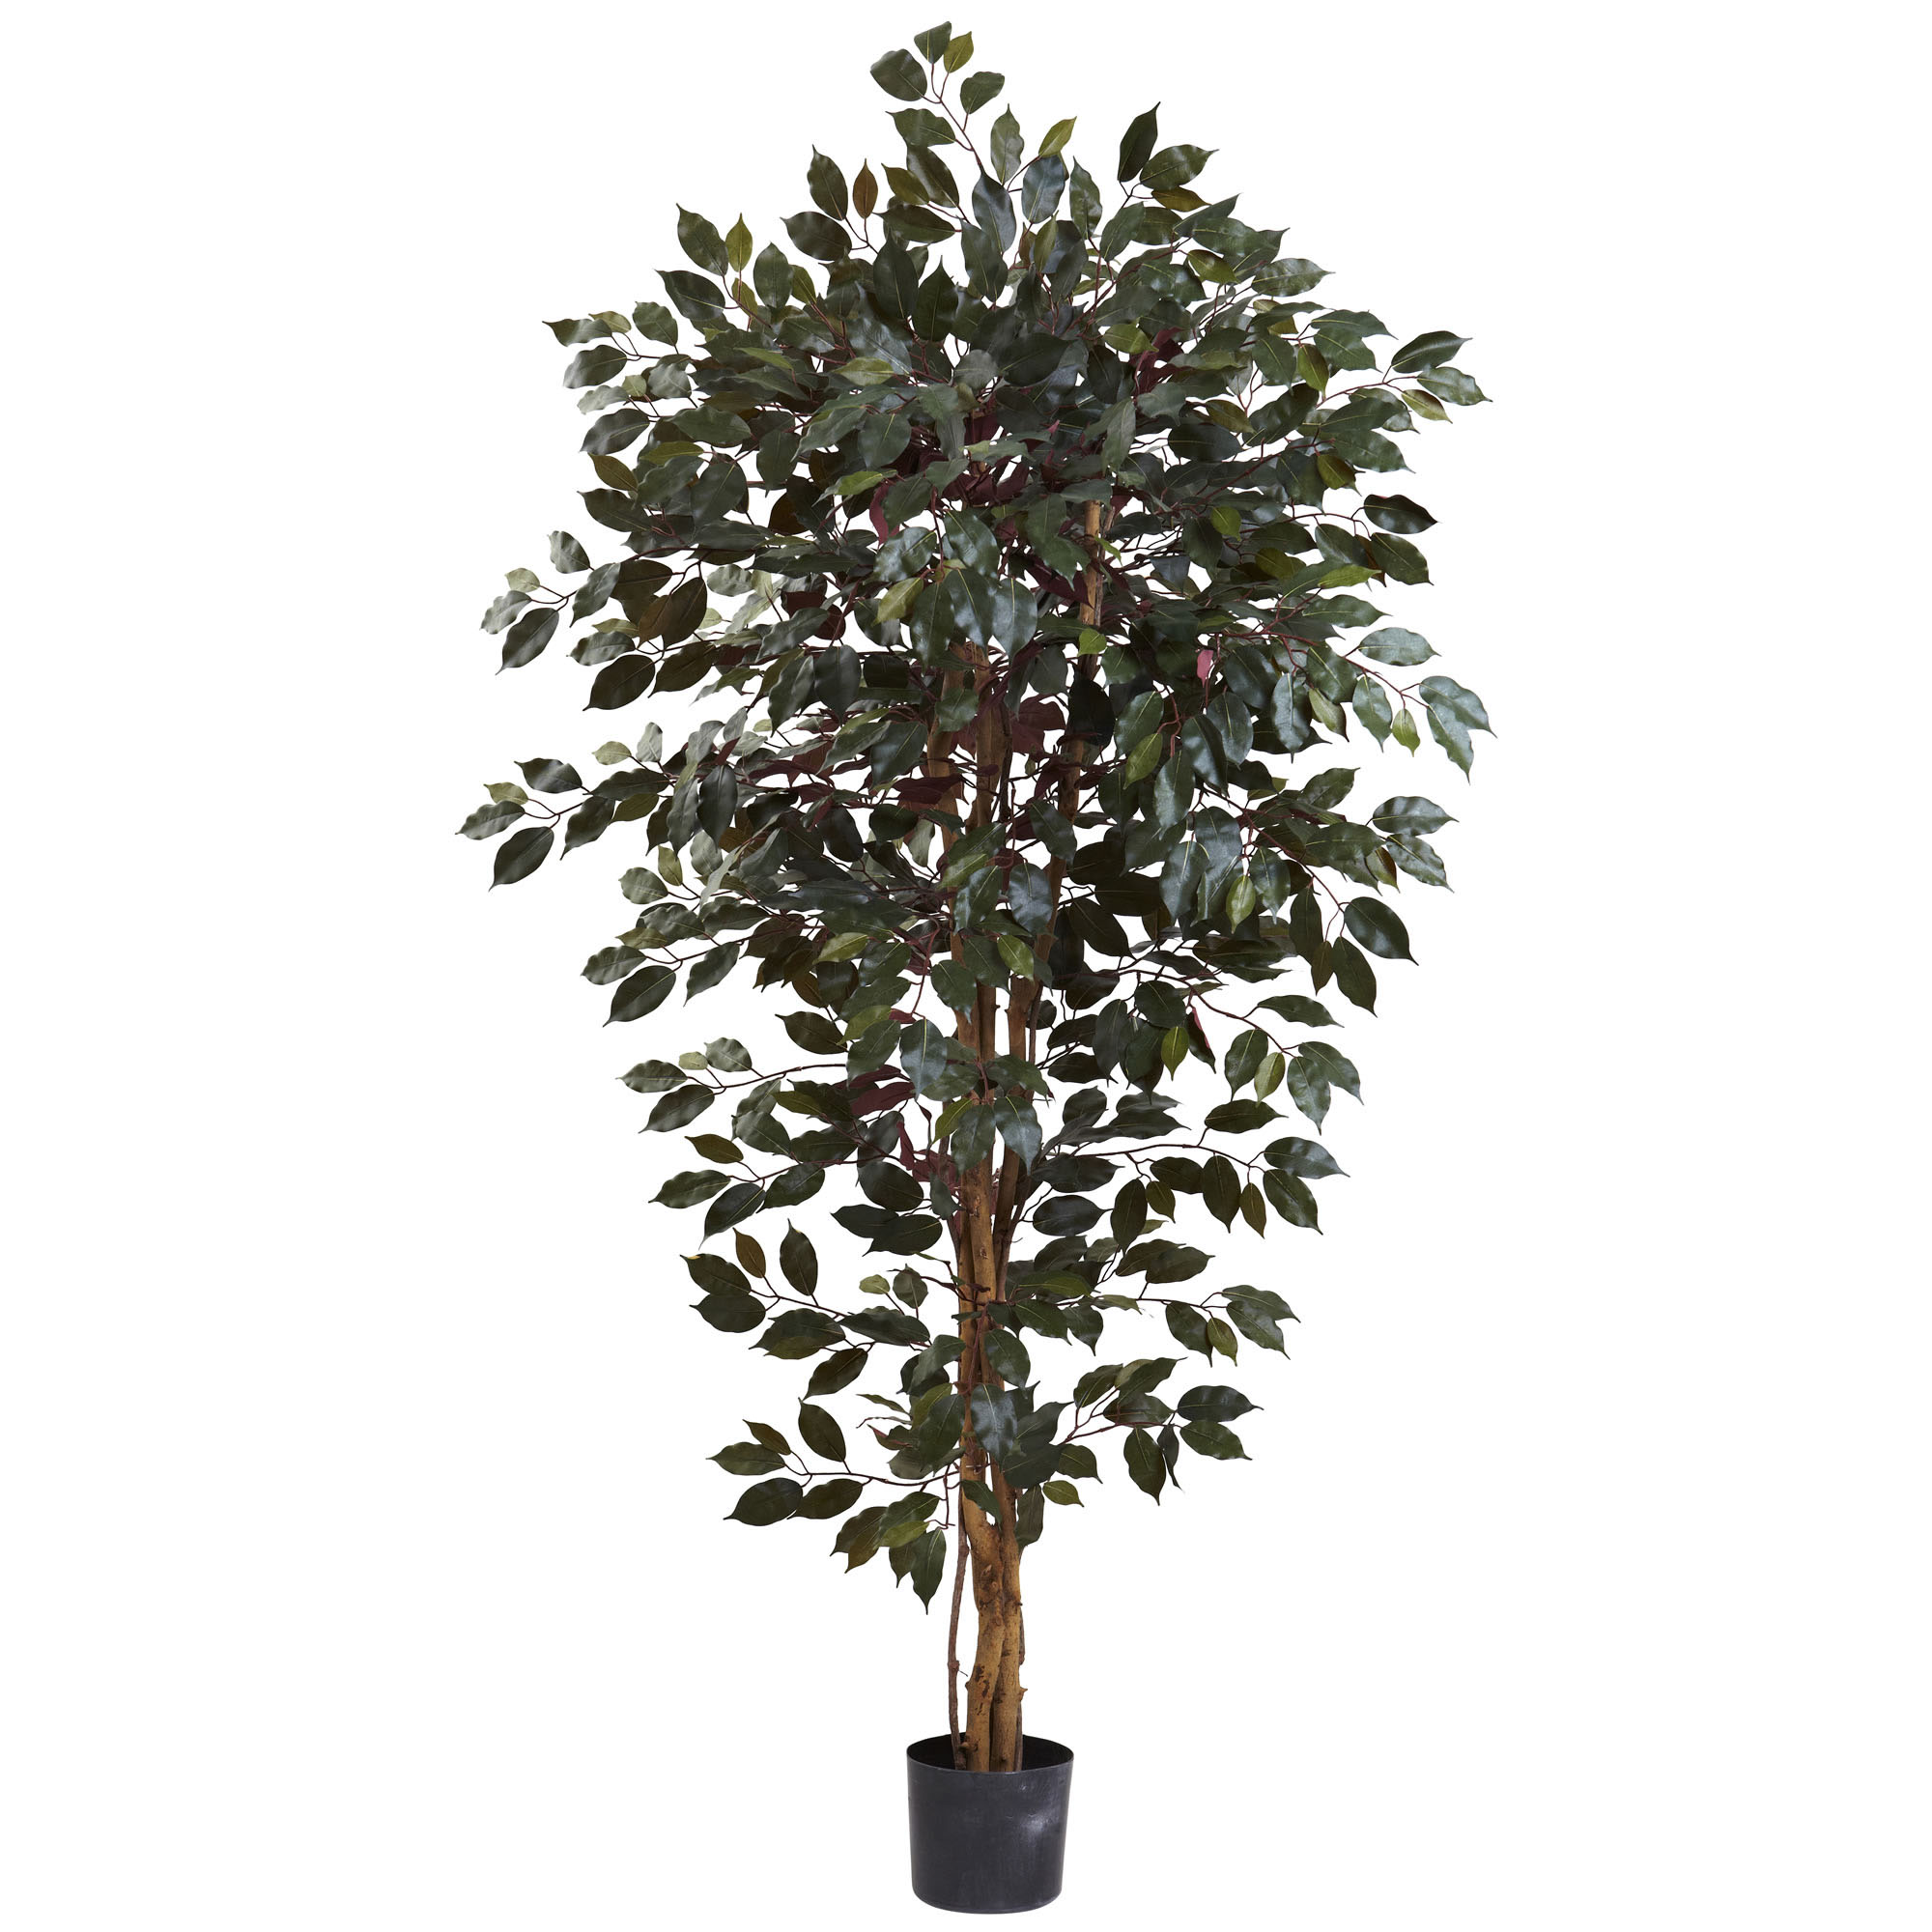 6 Foot Indoor Silk Capensia Ficus Tree With 3 Trunks: Potted